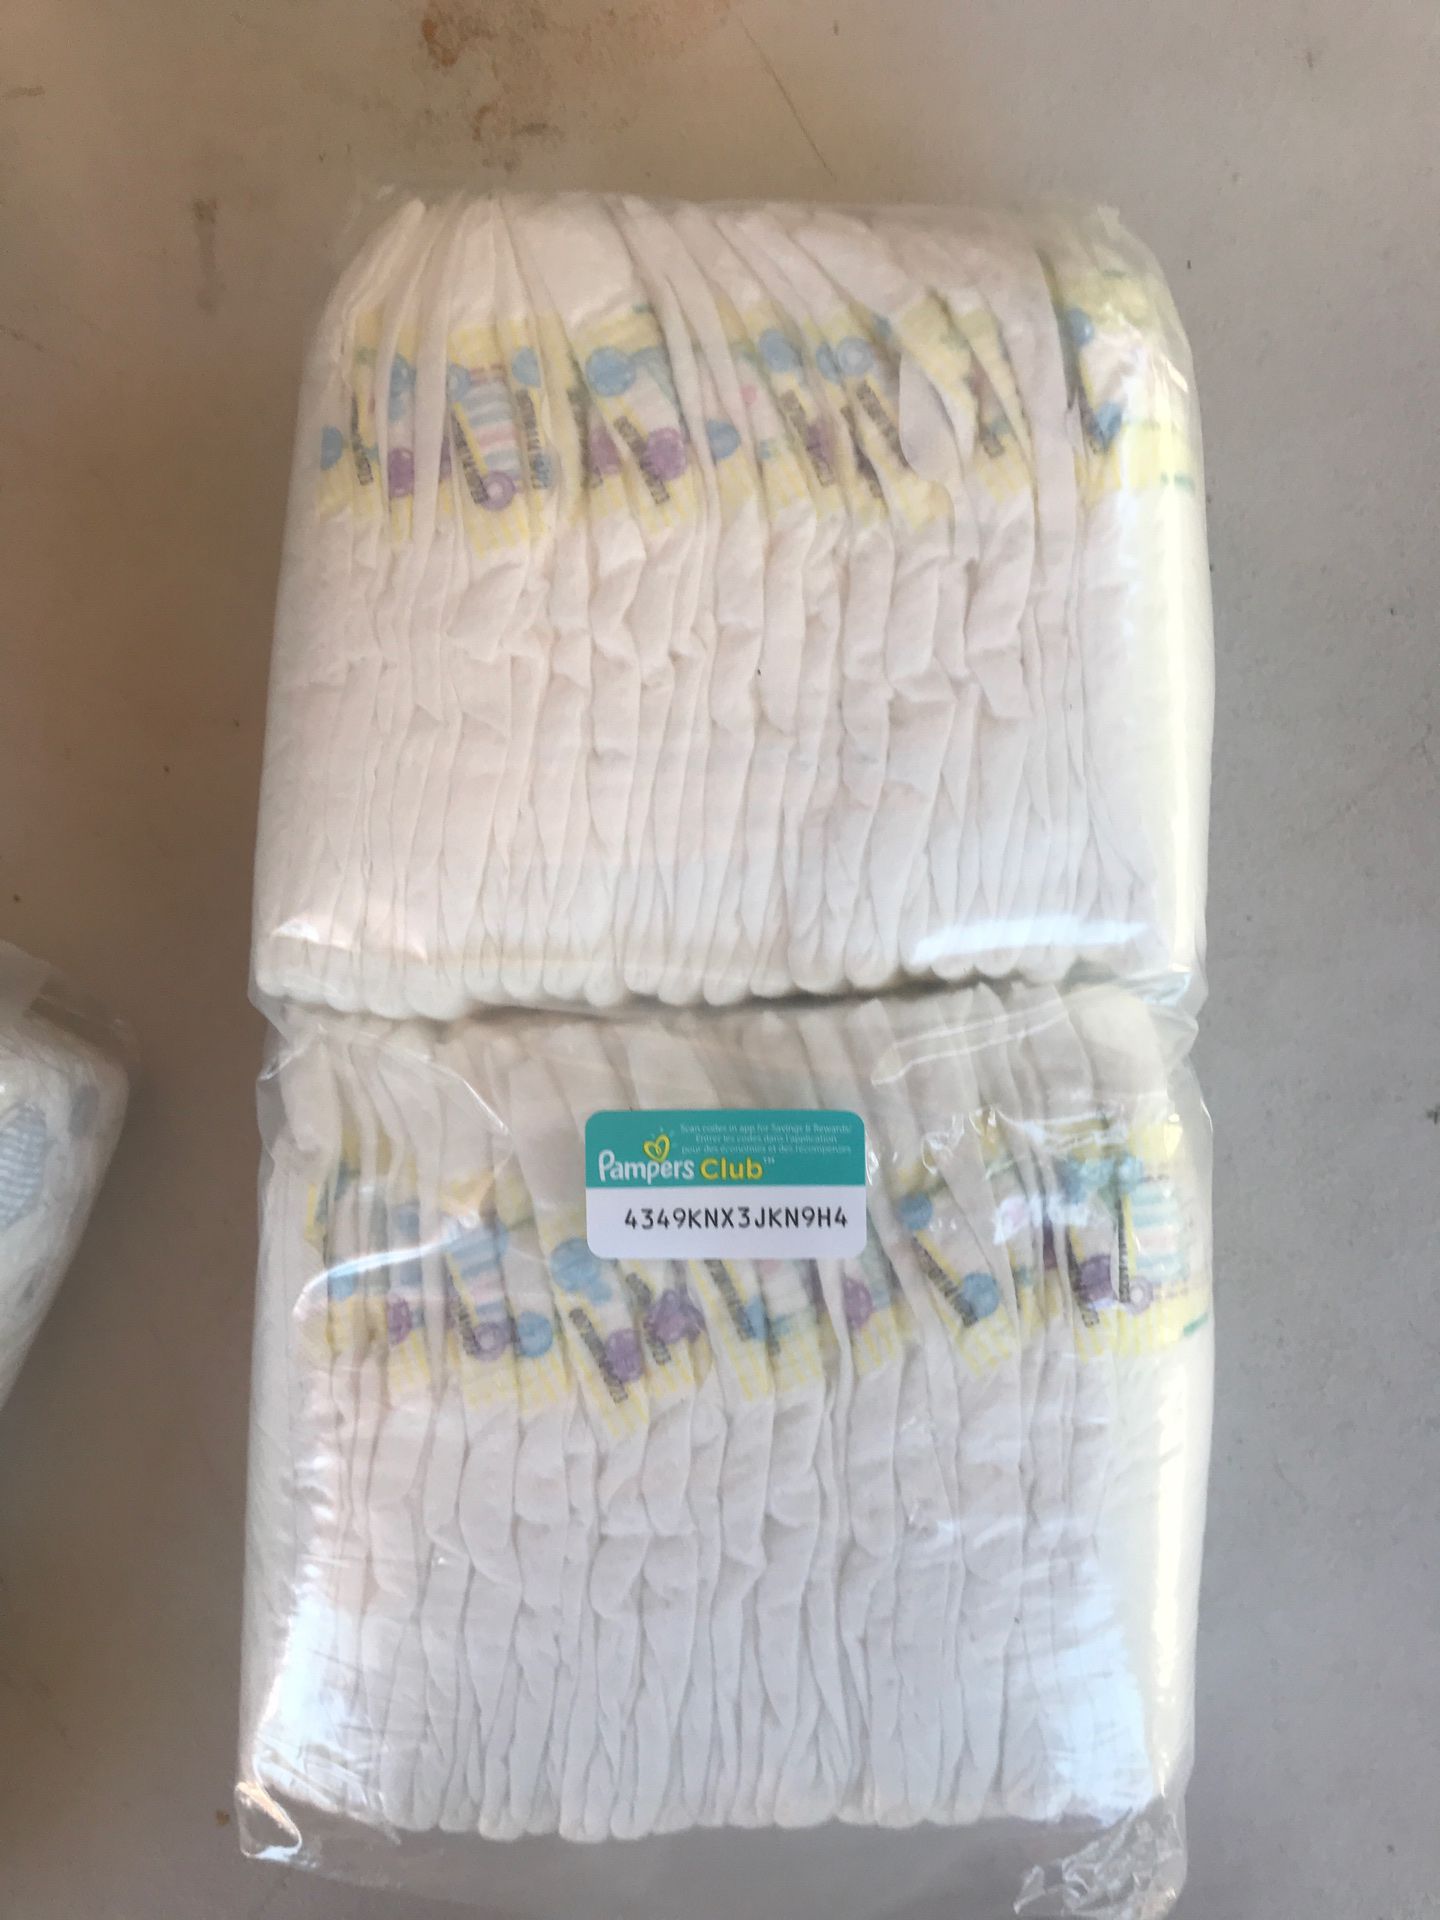 NEW PAMPERS BRAND 42 COUNT NEWBORN DIAPERS